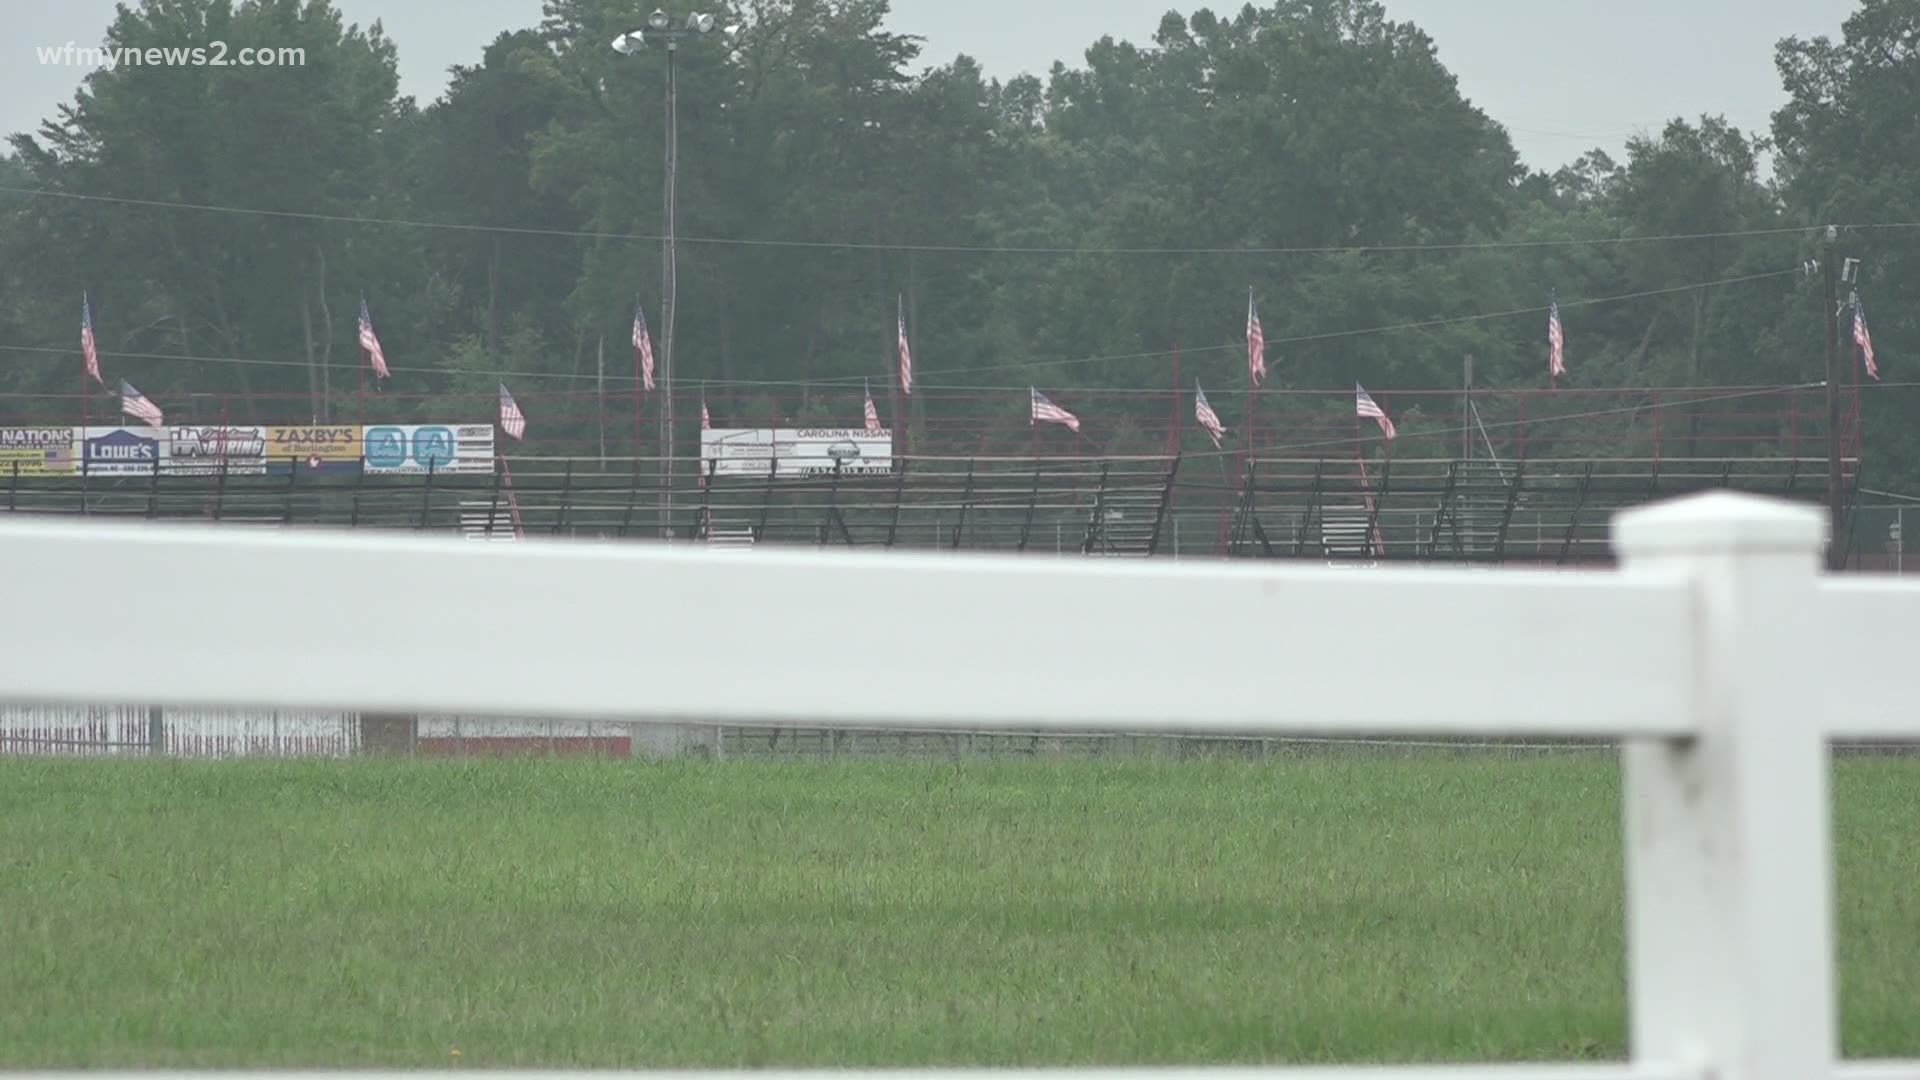 Ace Speedway was ordered by a judge to shut down business after the NCDHHS filed a temporary restraining order. The track is looking at options for reopening.